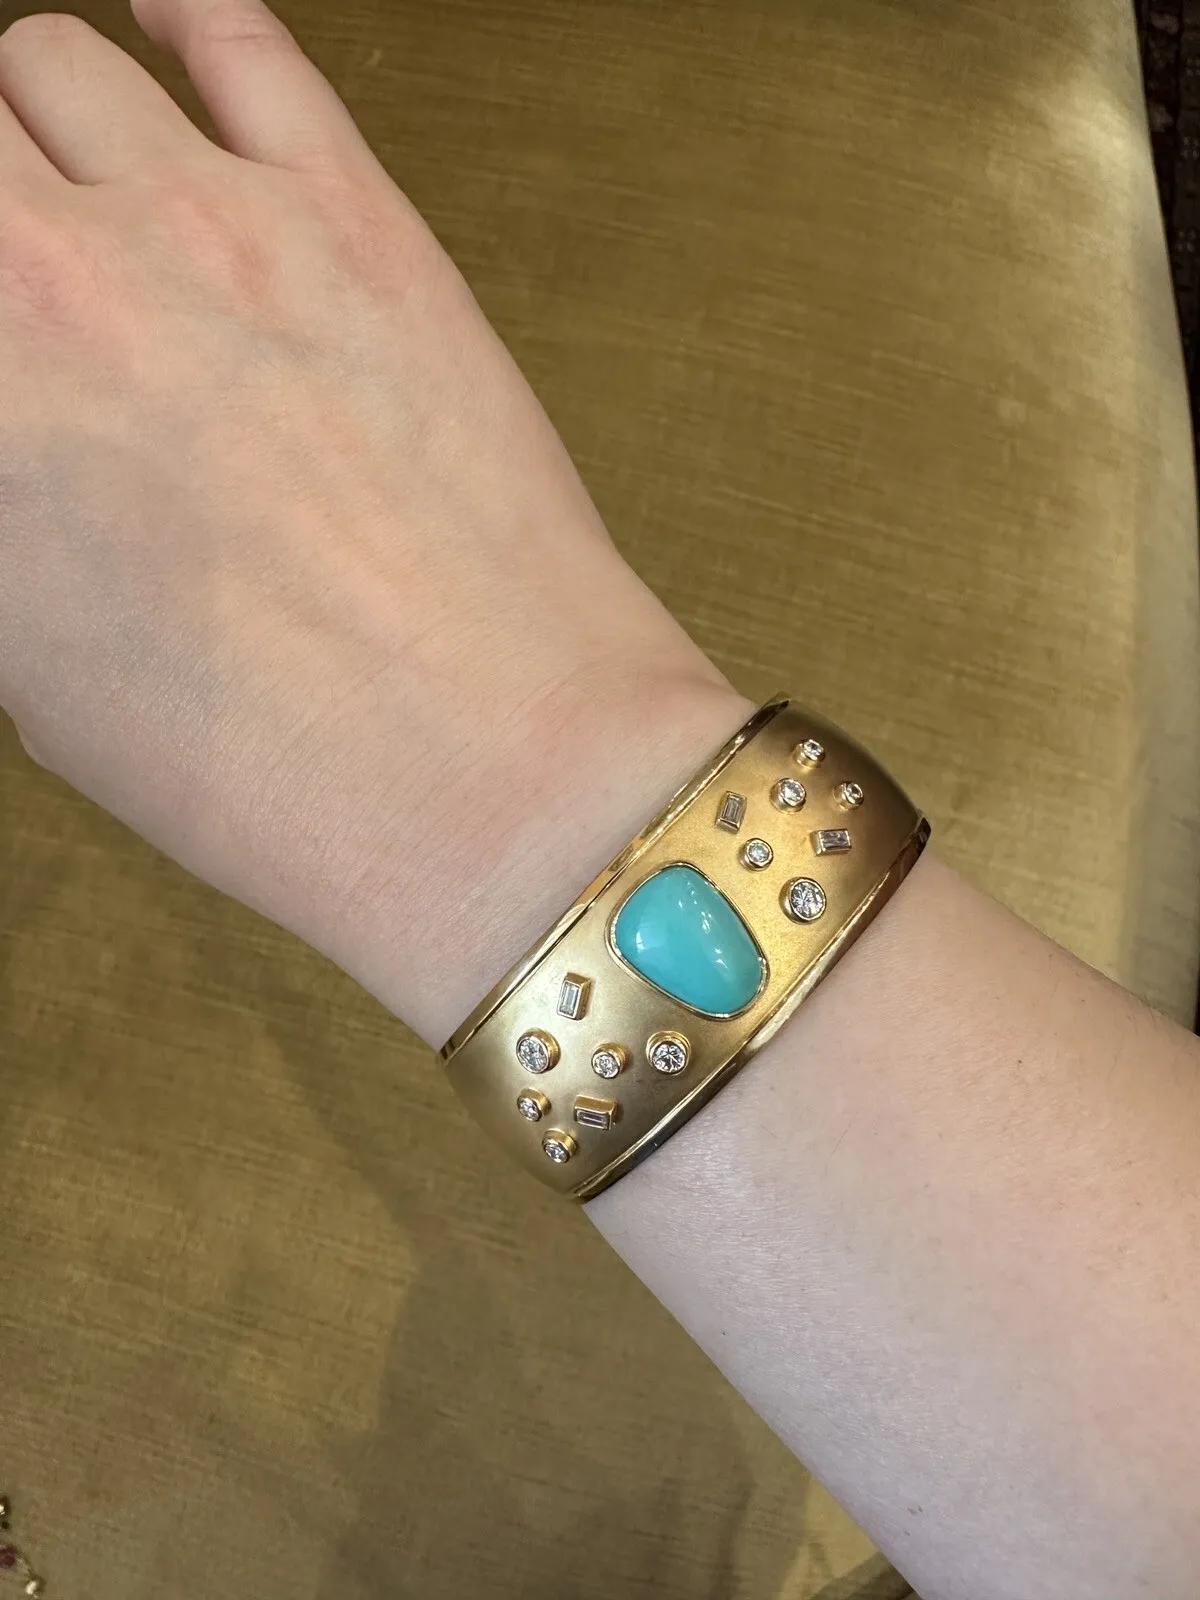 Susan Sadler Turquoise and Diamond Cuff Bracelet in 18k Yellow Gold

Susan Sadler Turquoise and Diamond Cuff features a centerpiece of Natural Turquoise with Round and Baguette Diamonds bezel-set on an 18k Yellow Gold Cuff Bracelet with a